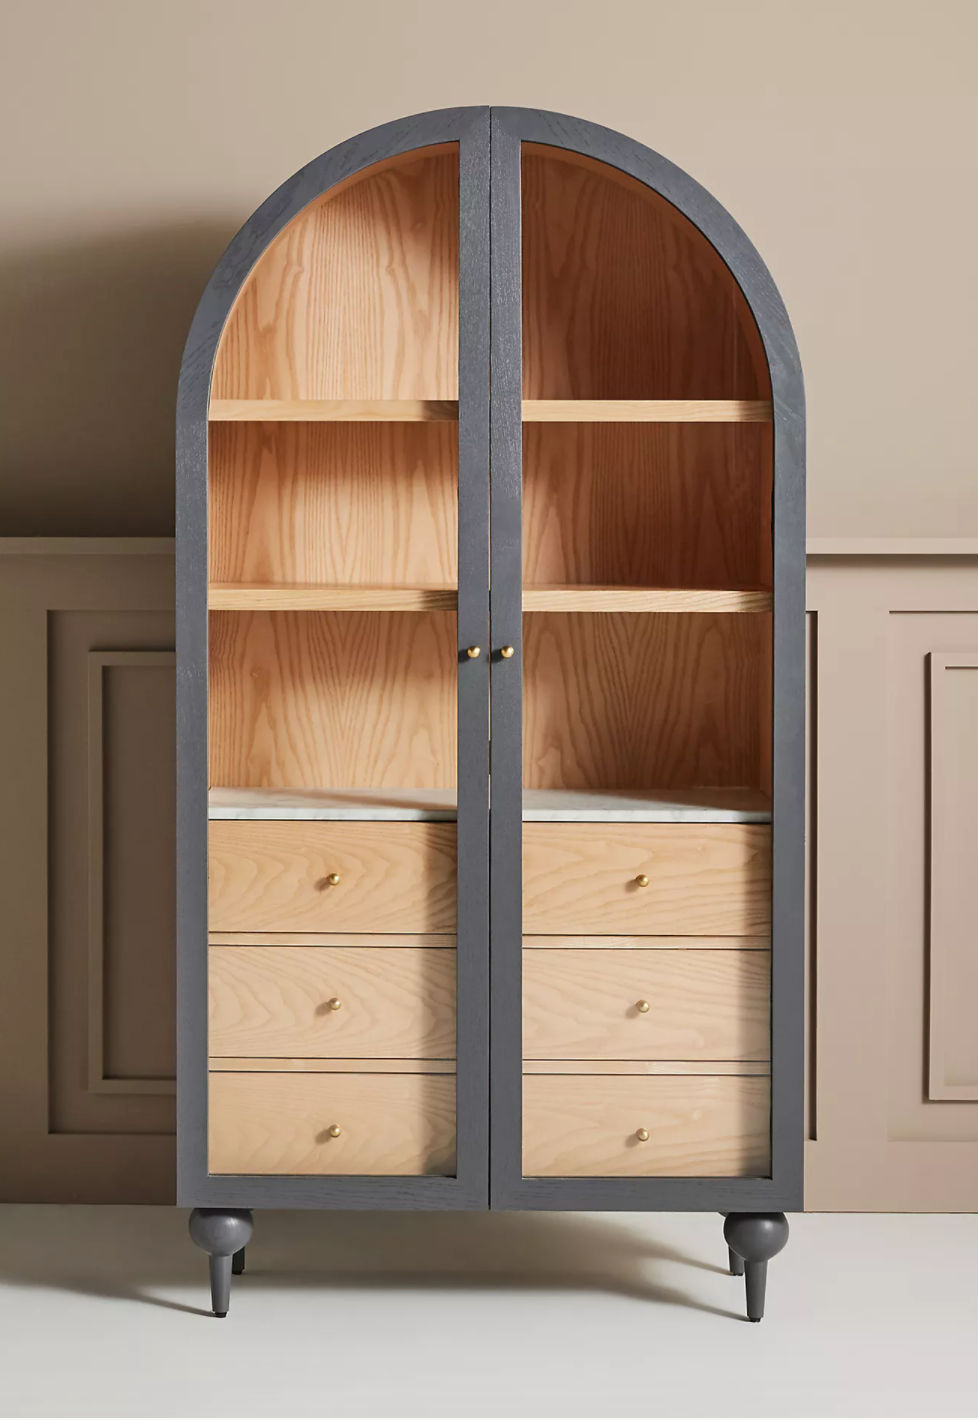 LOVE this curved cabinet we bought for our home!